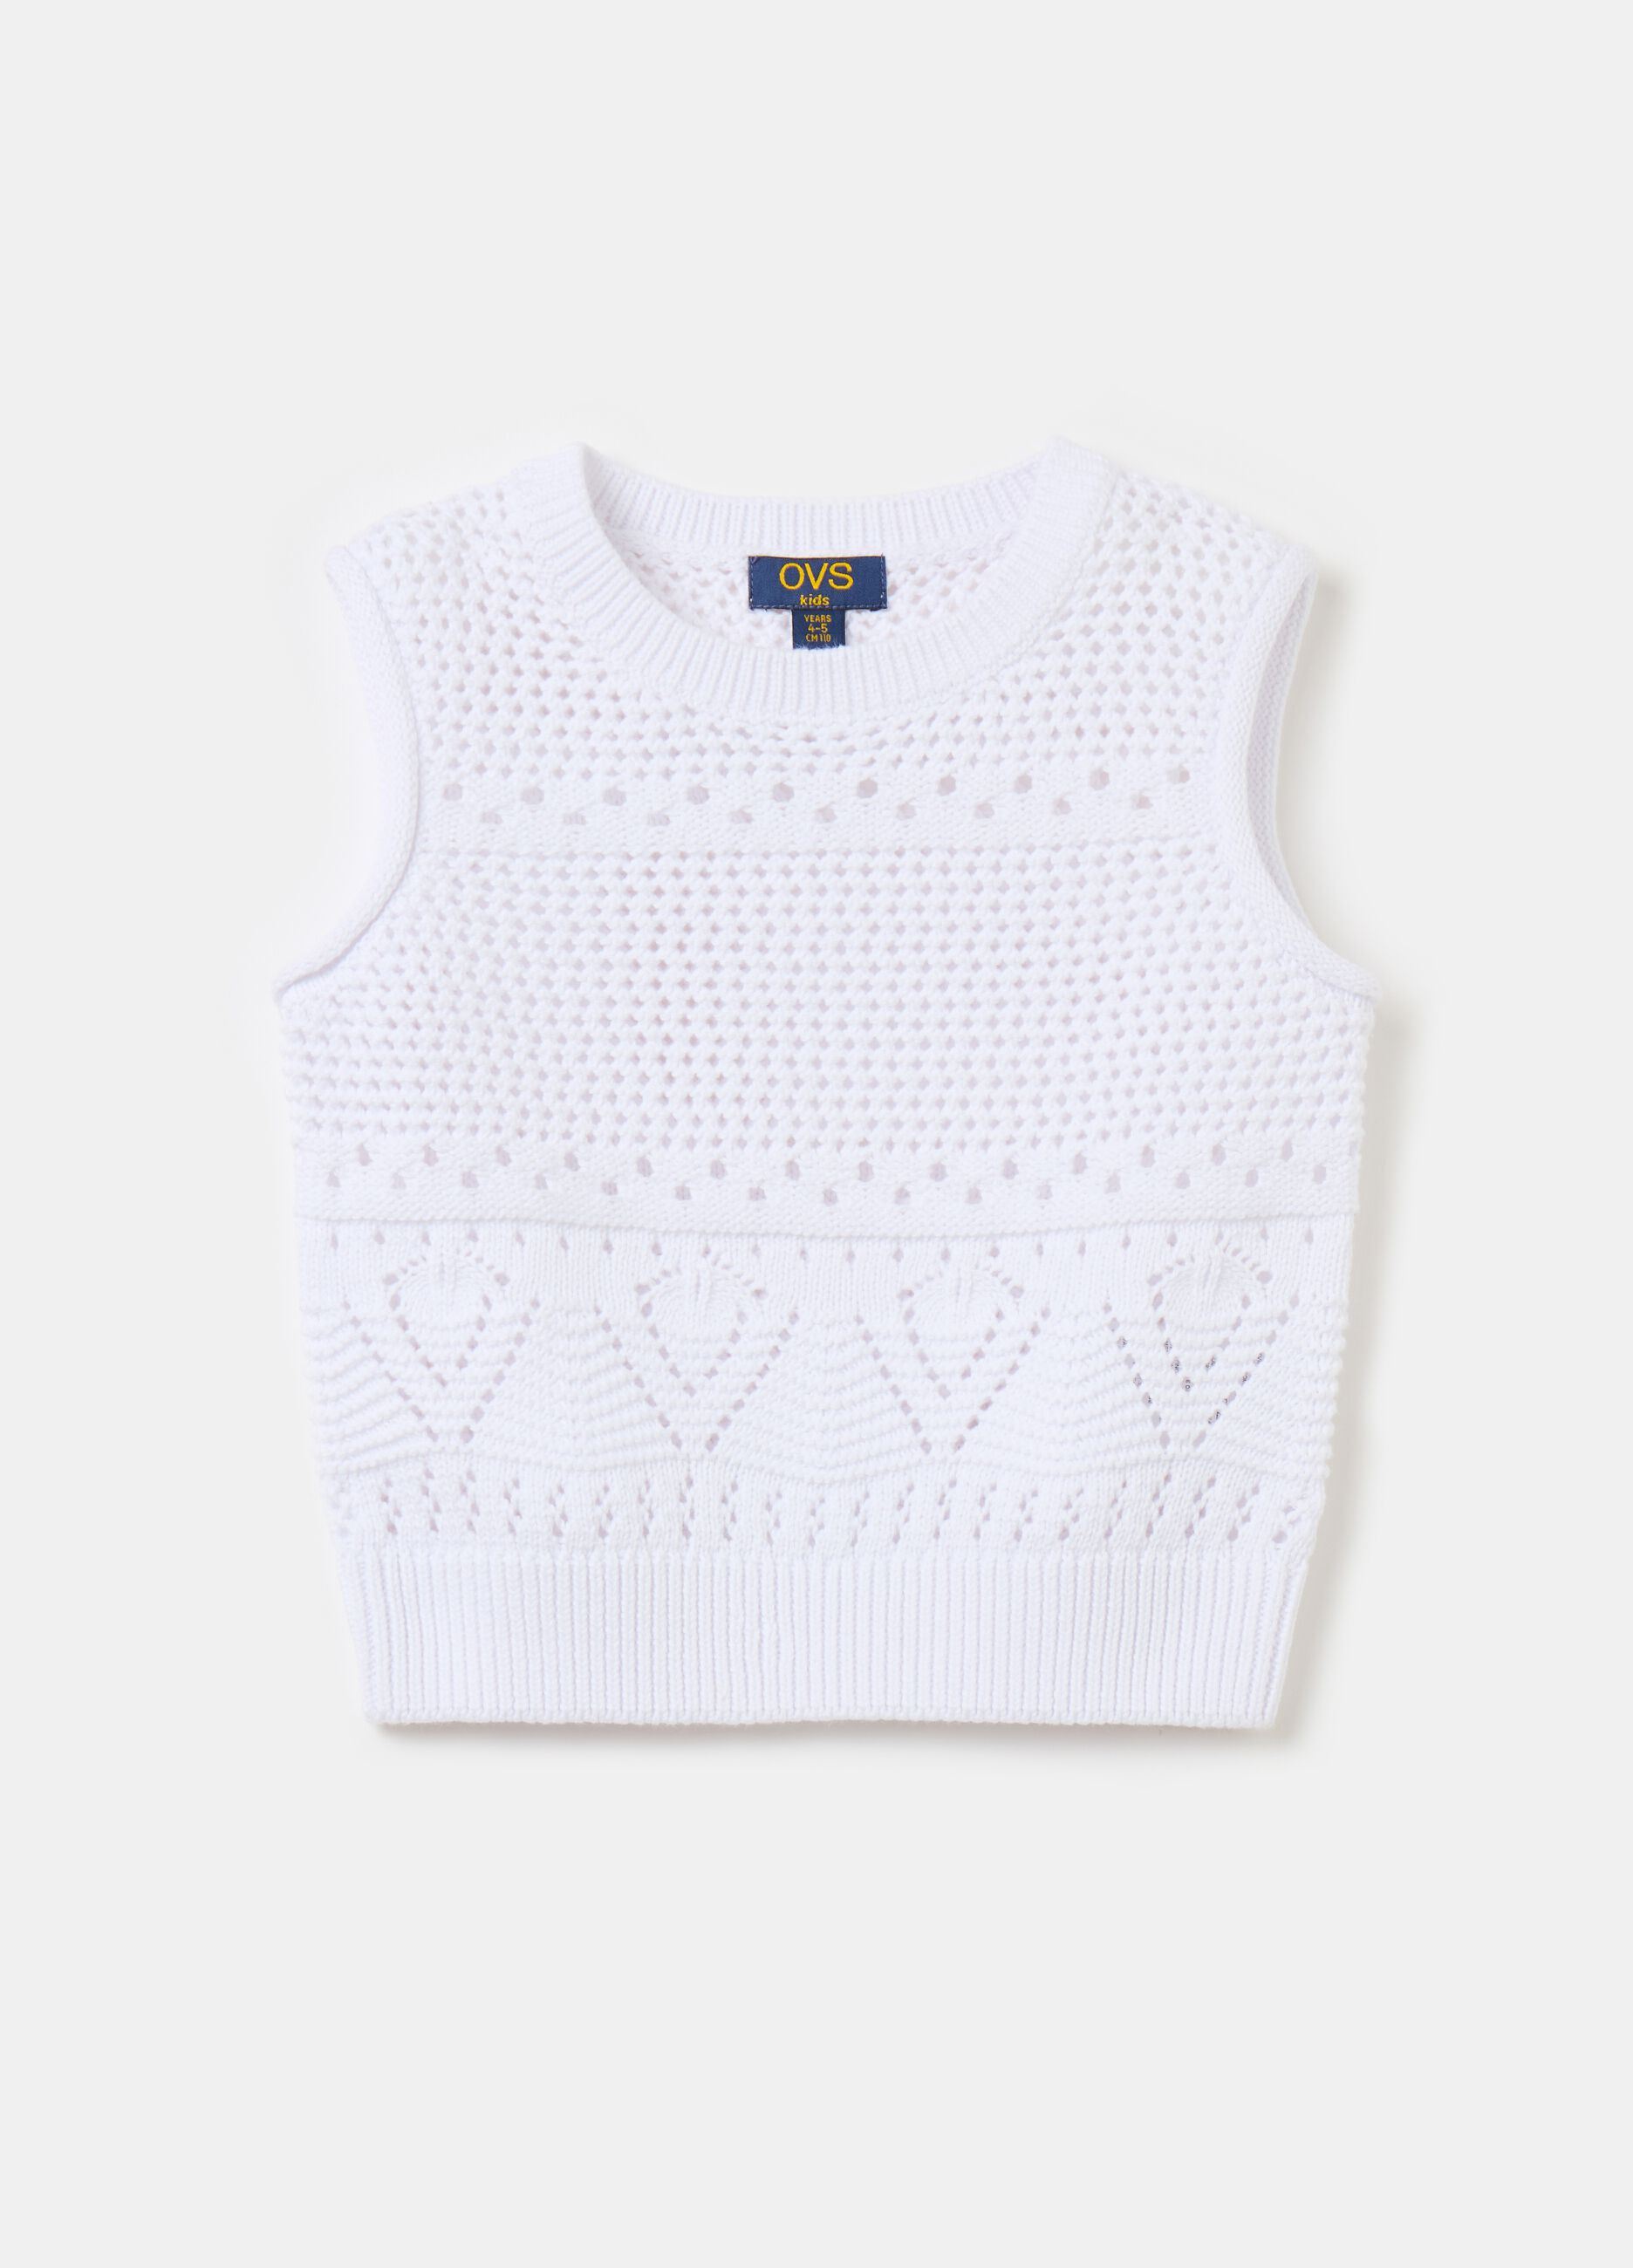 Knitted tank top with openwork design